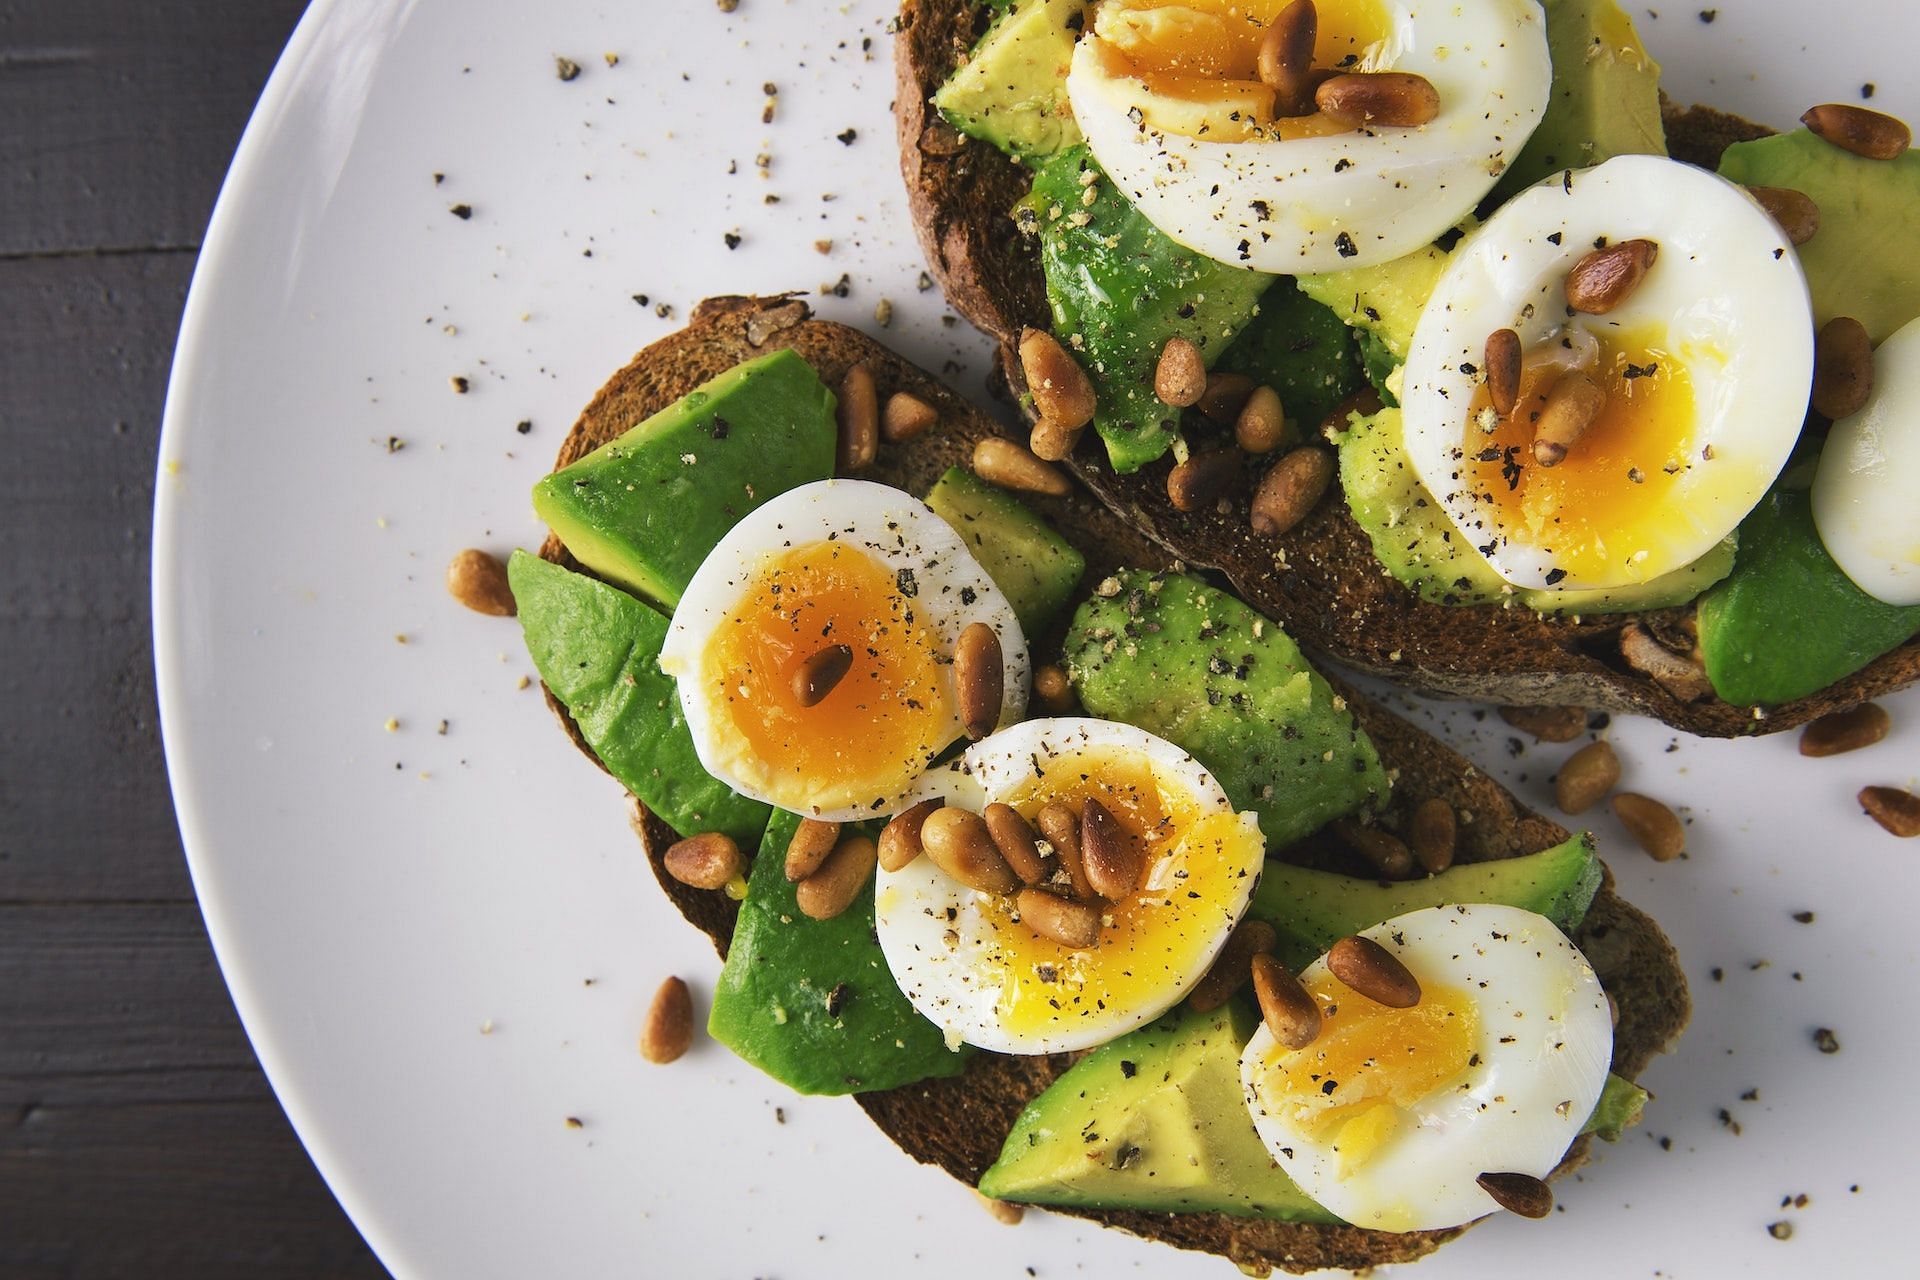 Keto diet basics, benefits and much more.  (Image credits: Pexels/ Foodie Factor)